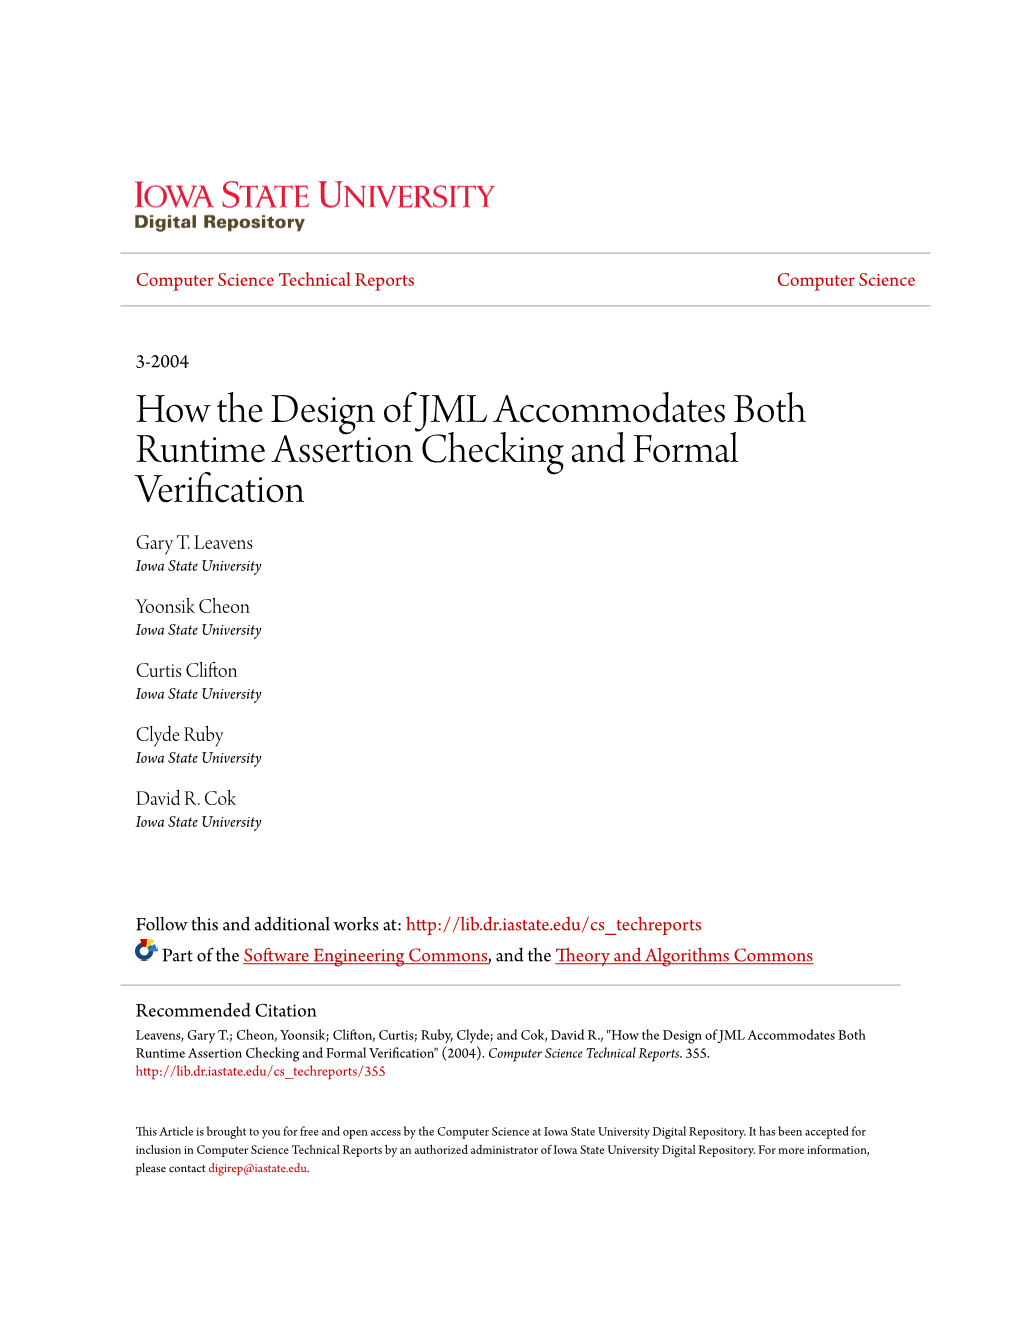 How the Design of JML Accommodates Both Runtime Assertion Checking and Formal Verification Gary T